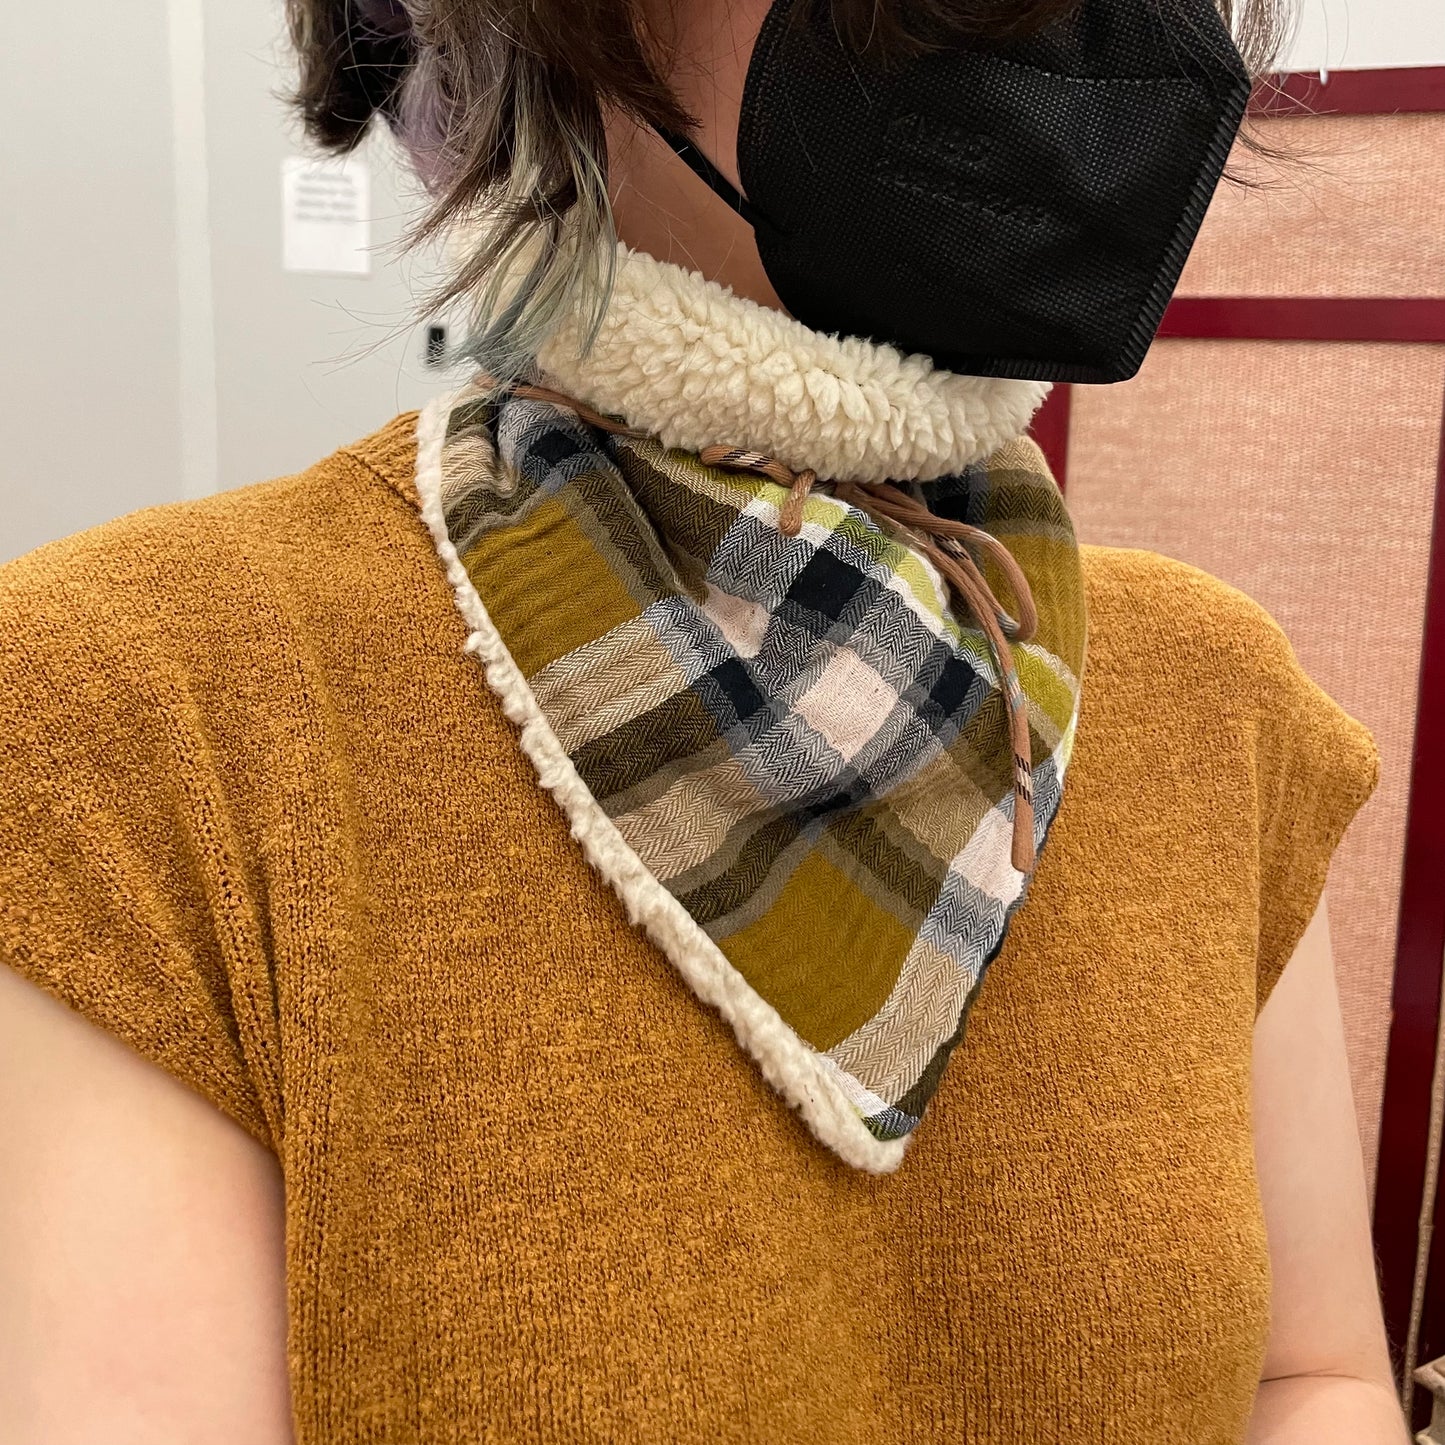 Sherpa/plaid reversible triangle scarf